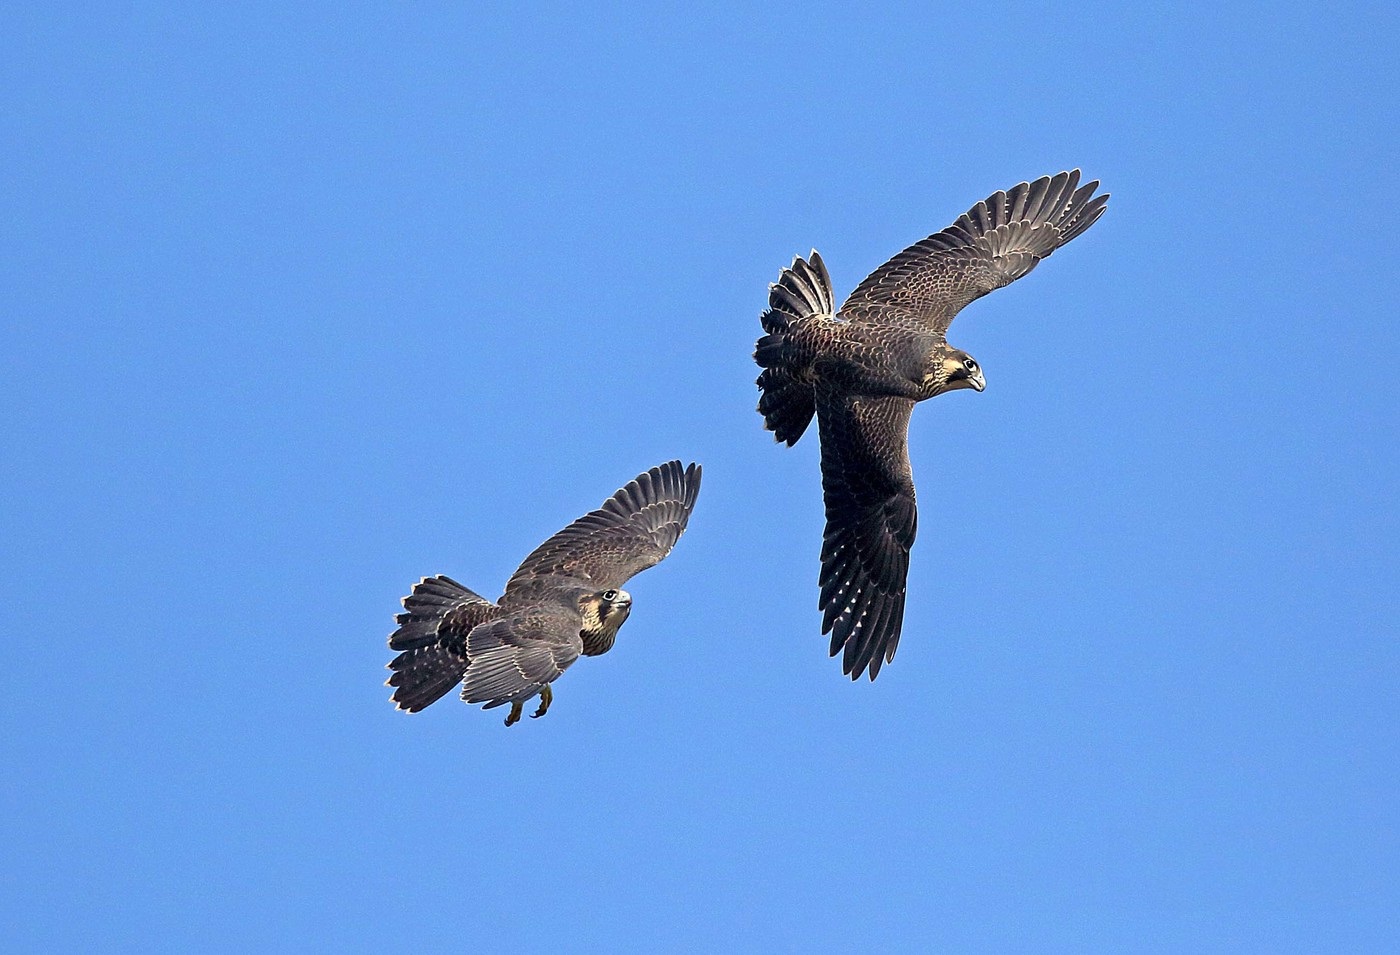 A pair of peregrine falcons in flight